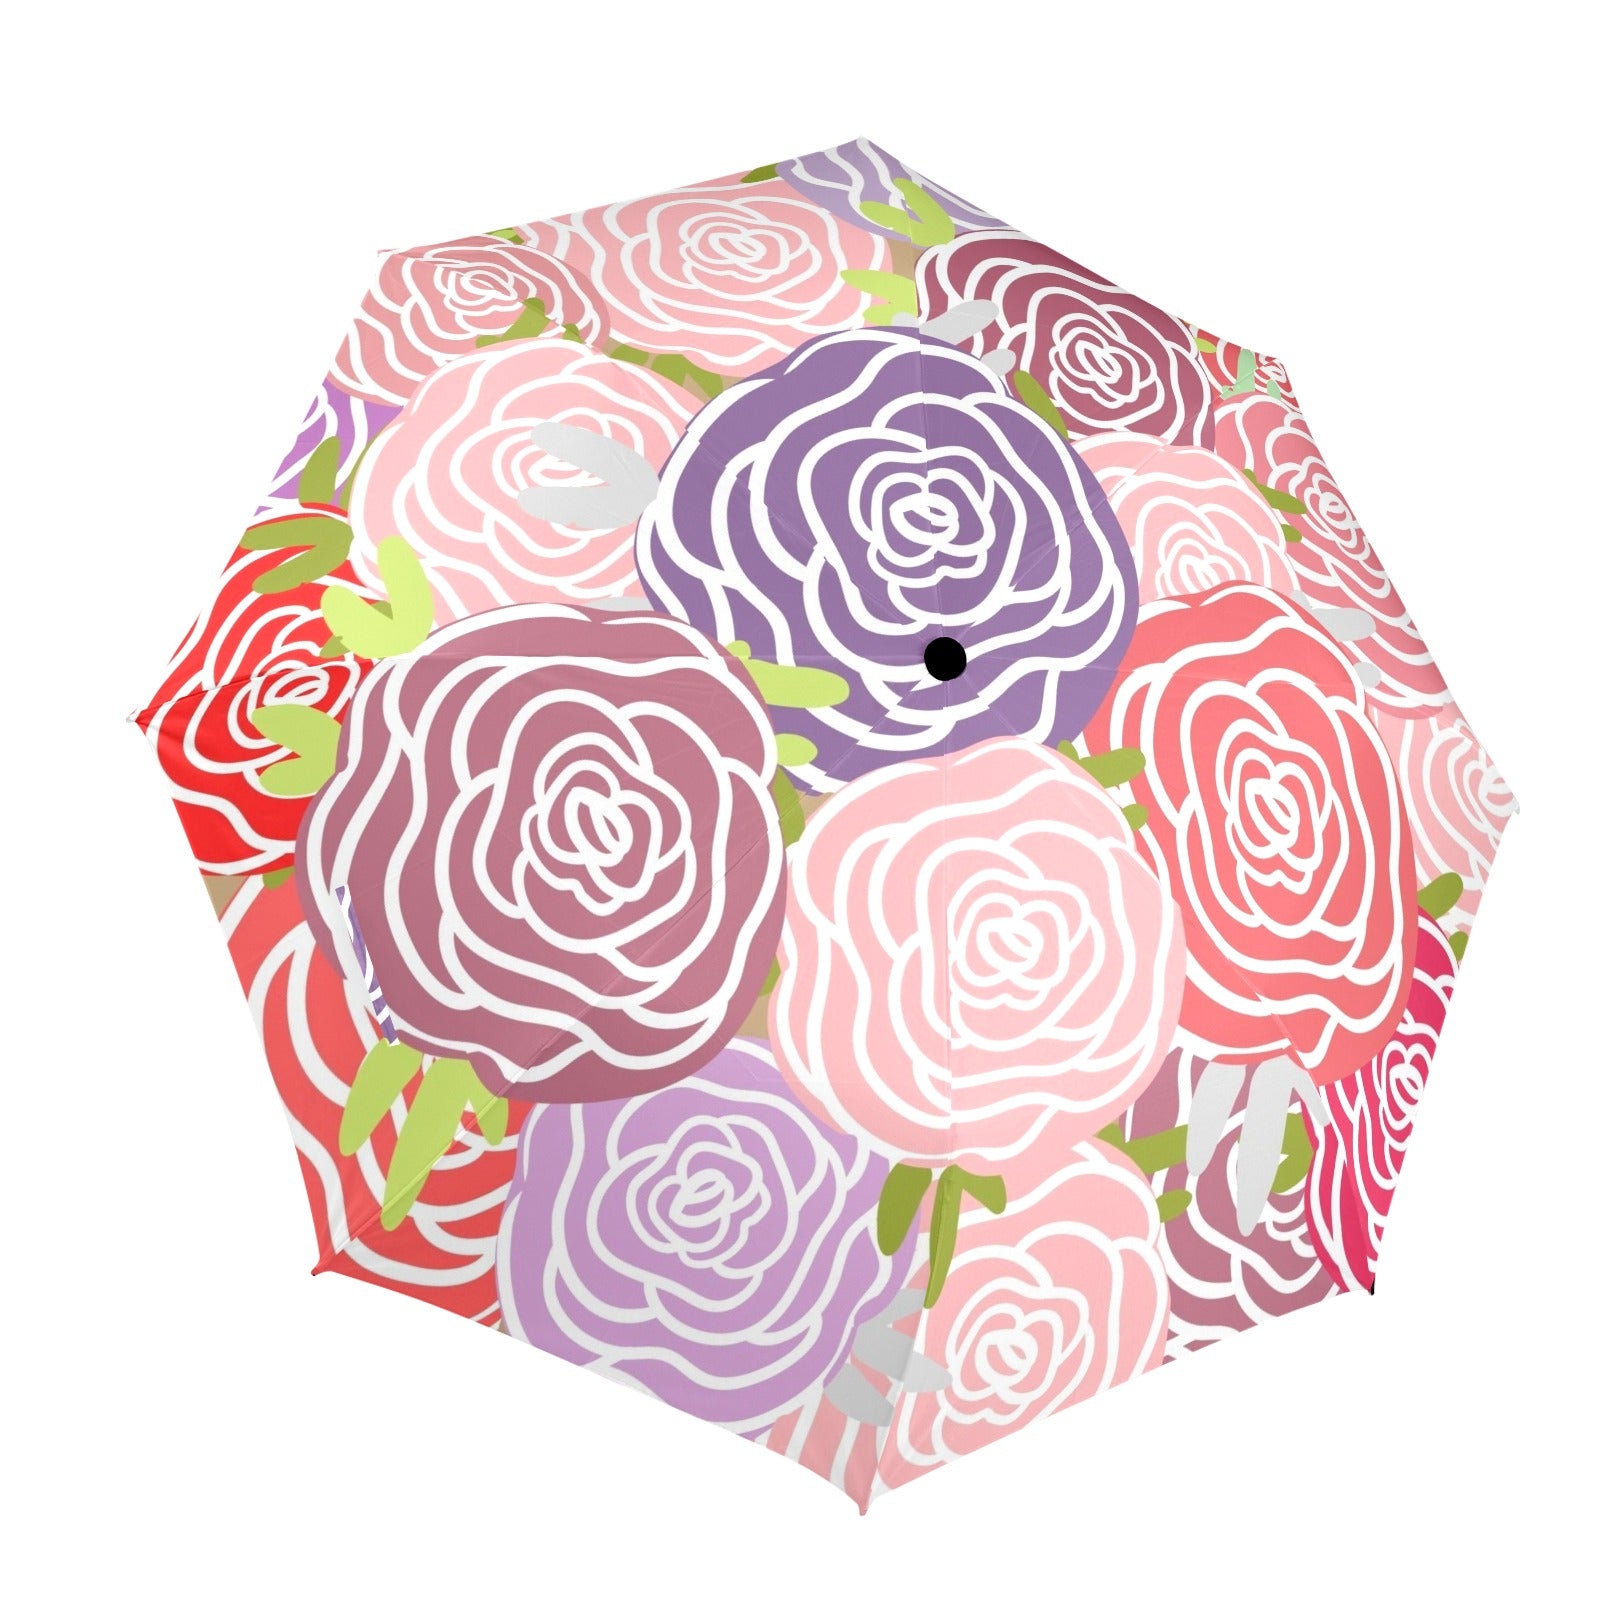 Abstract Roses - Semi-Automatic Foldable Umbrella Semi-Automatic Foldable Umbrella